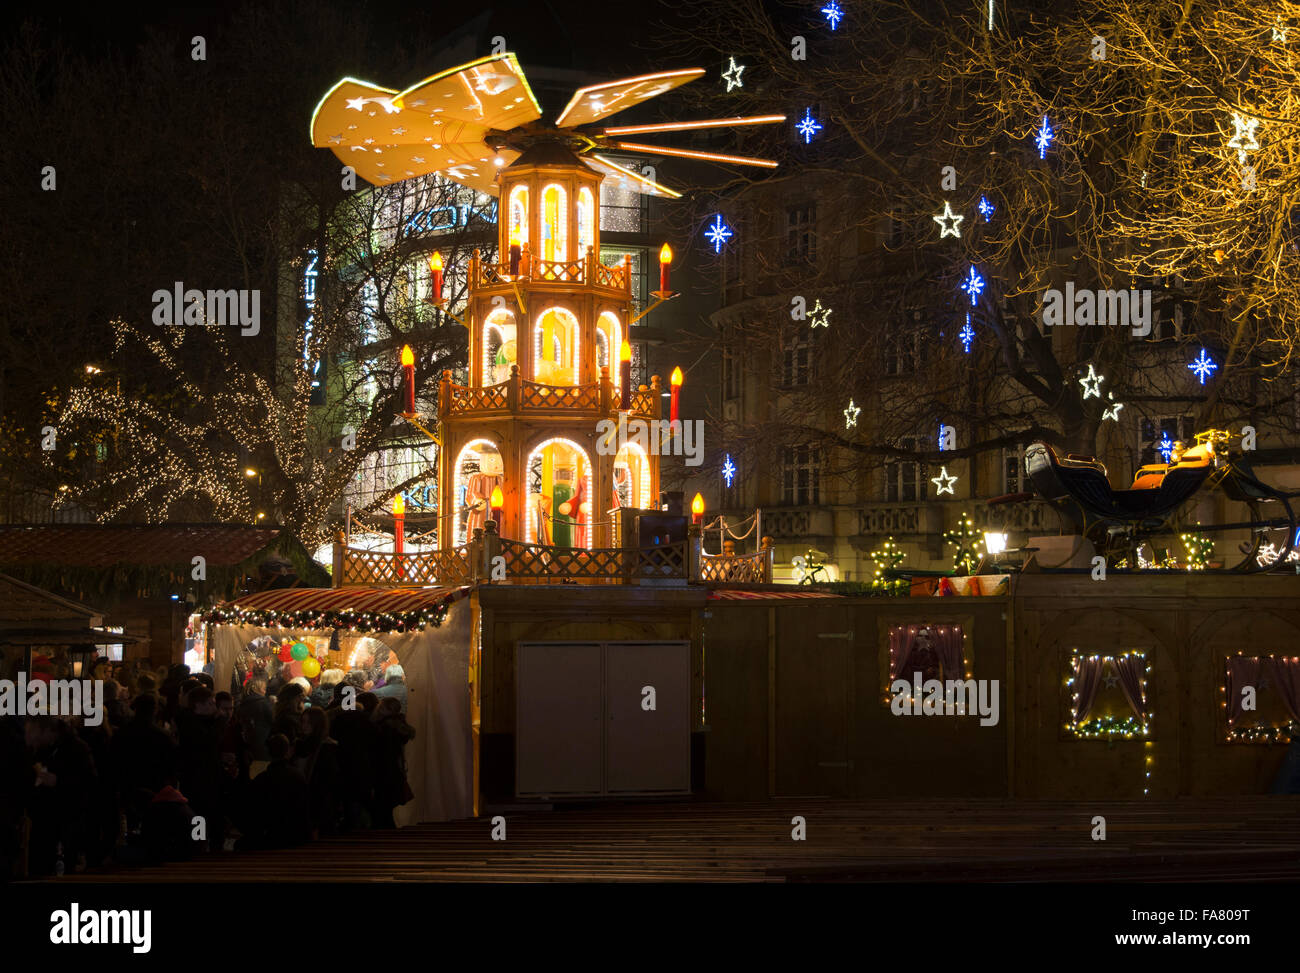 MUNICH, GERMANY - DECEMBER 12: Traditional christmas market at night with a illuminated pyramid in Munich, Germany on December 1 Stock Photo